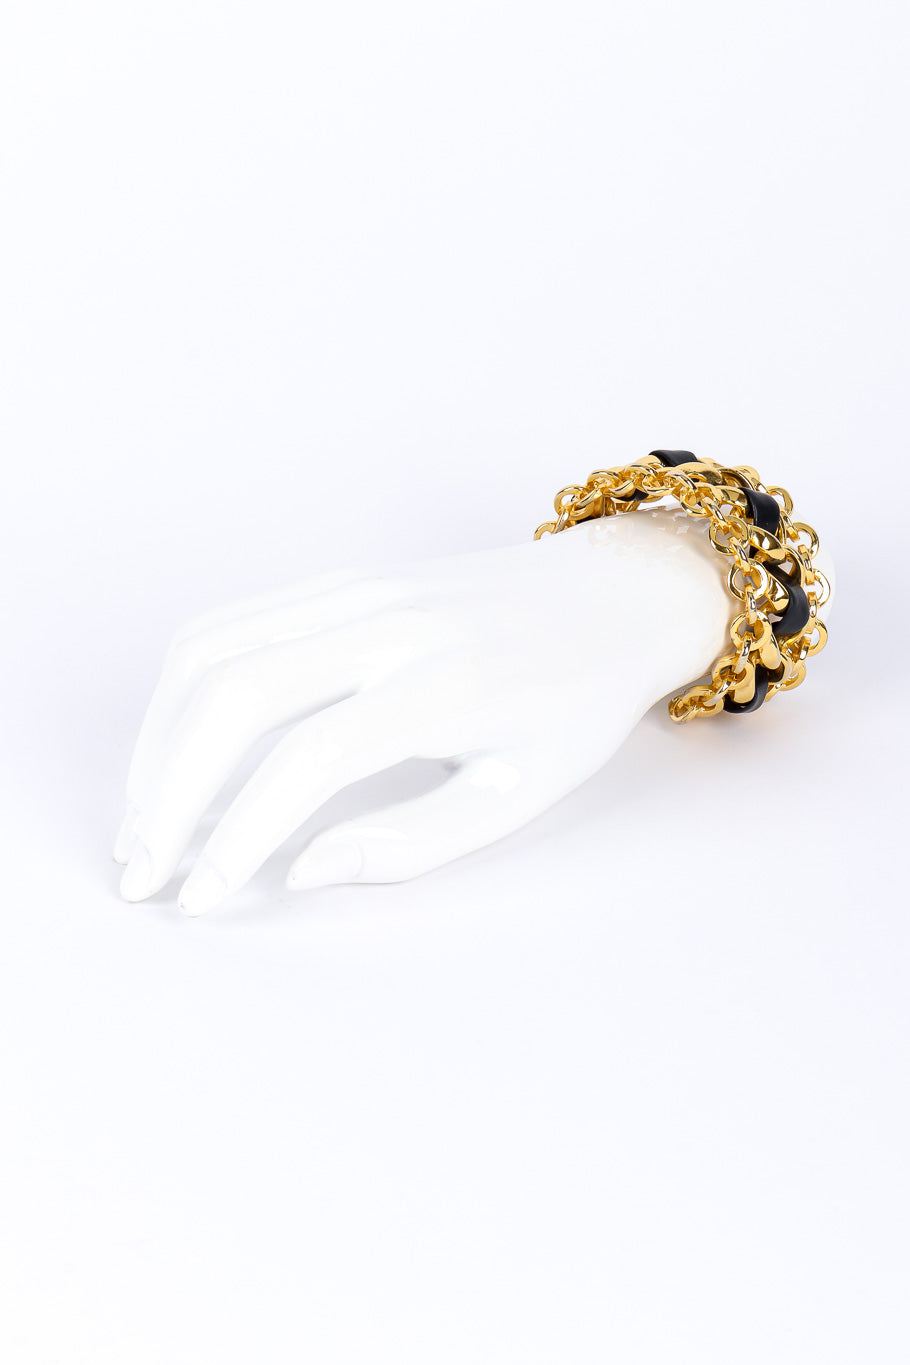 Vintage woven leather chain cuff on white background on mannequin hand @recessla